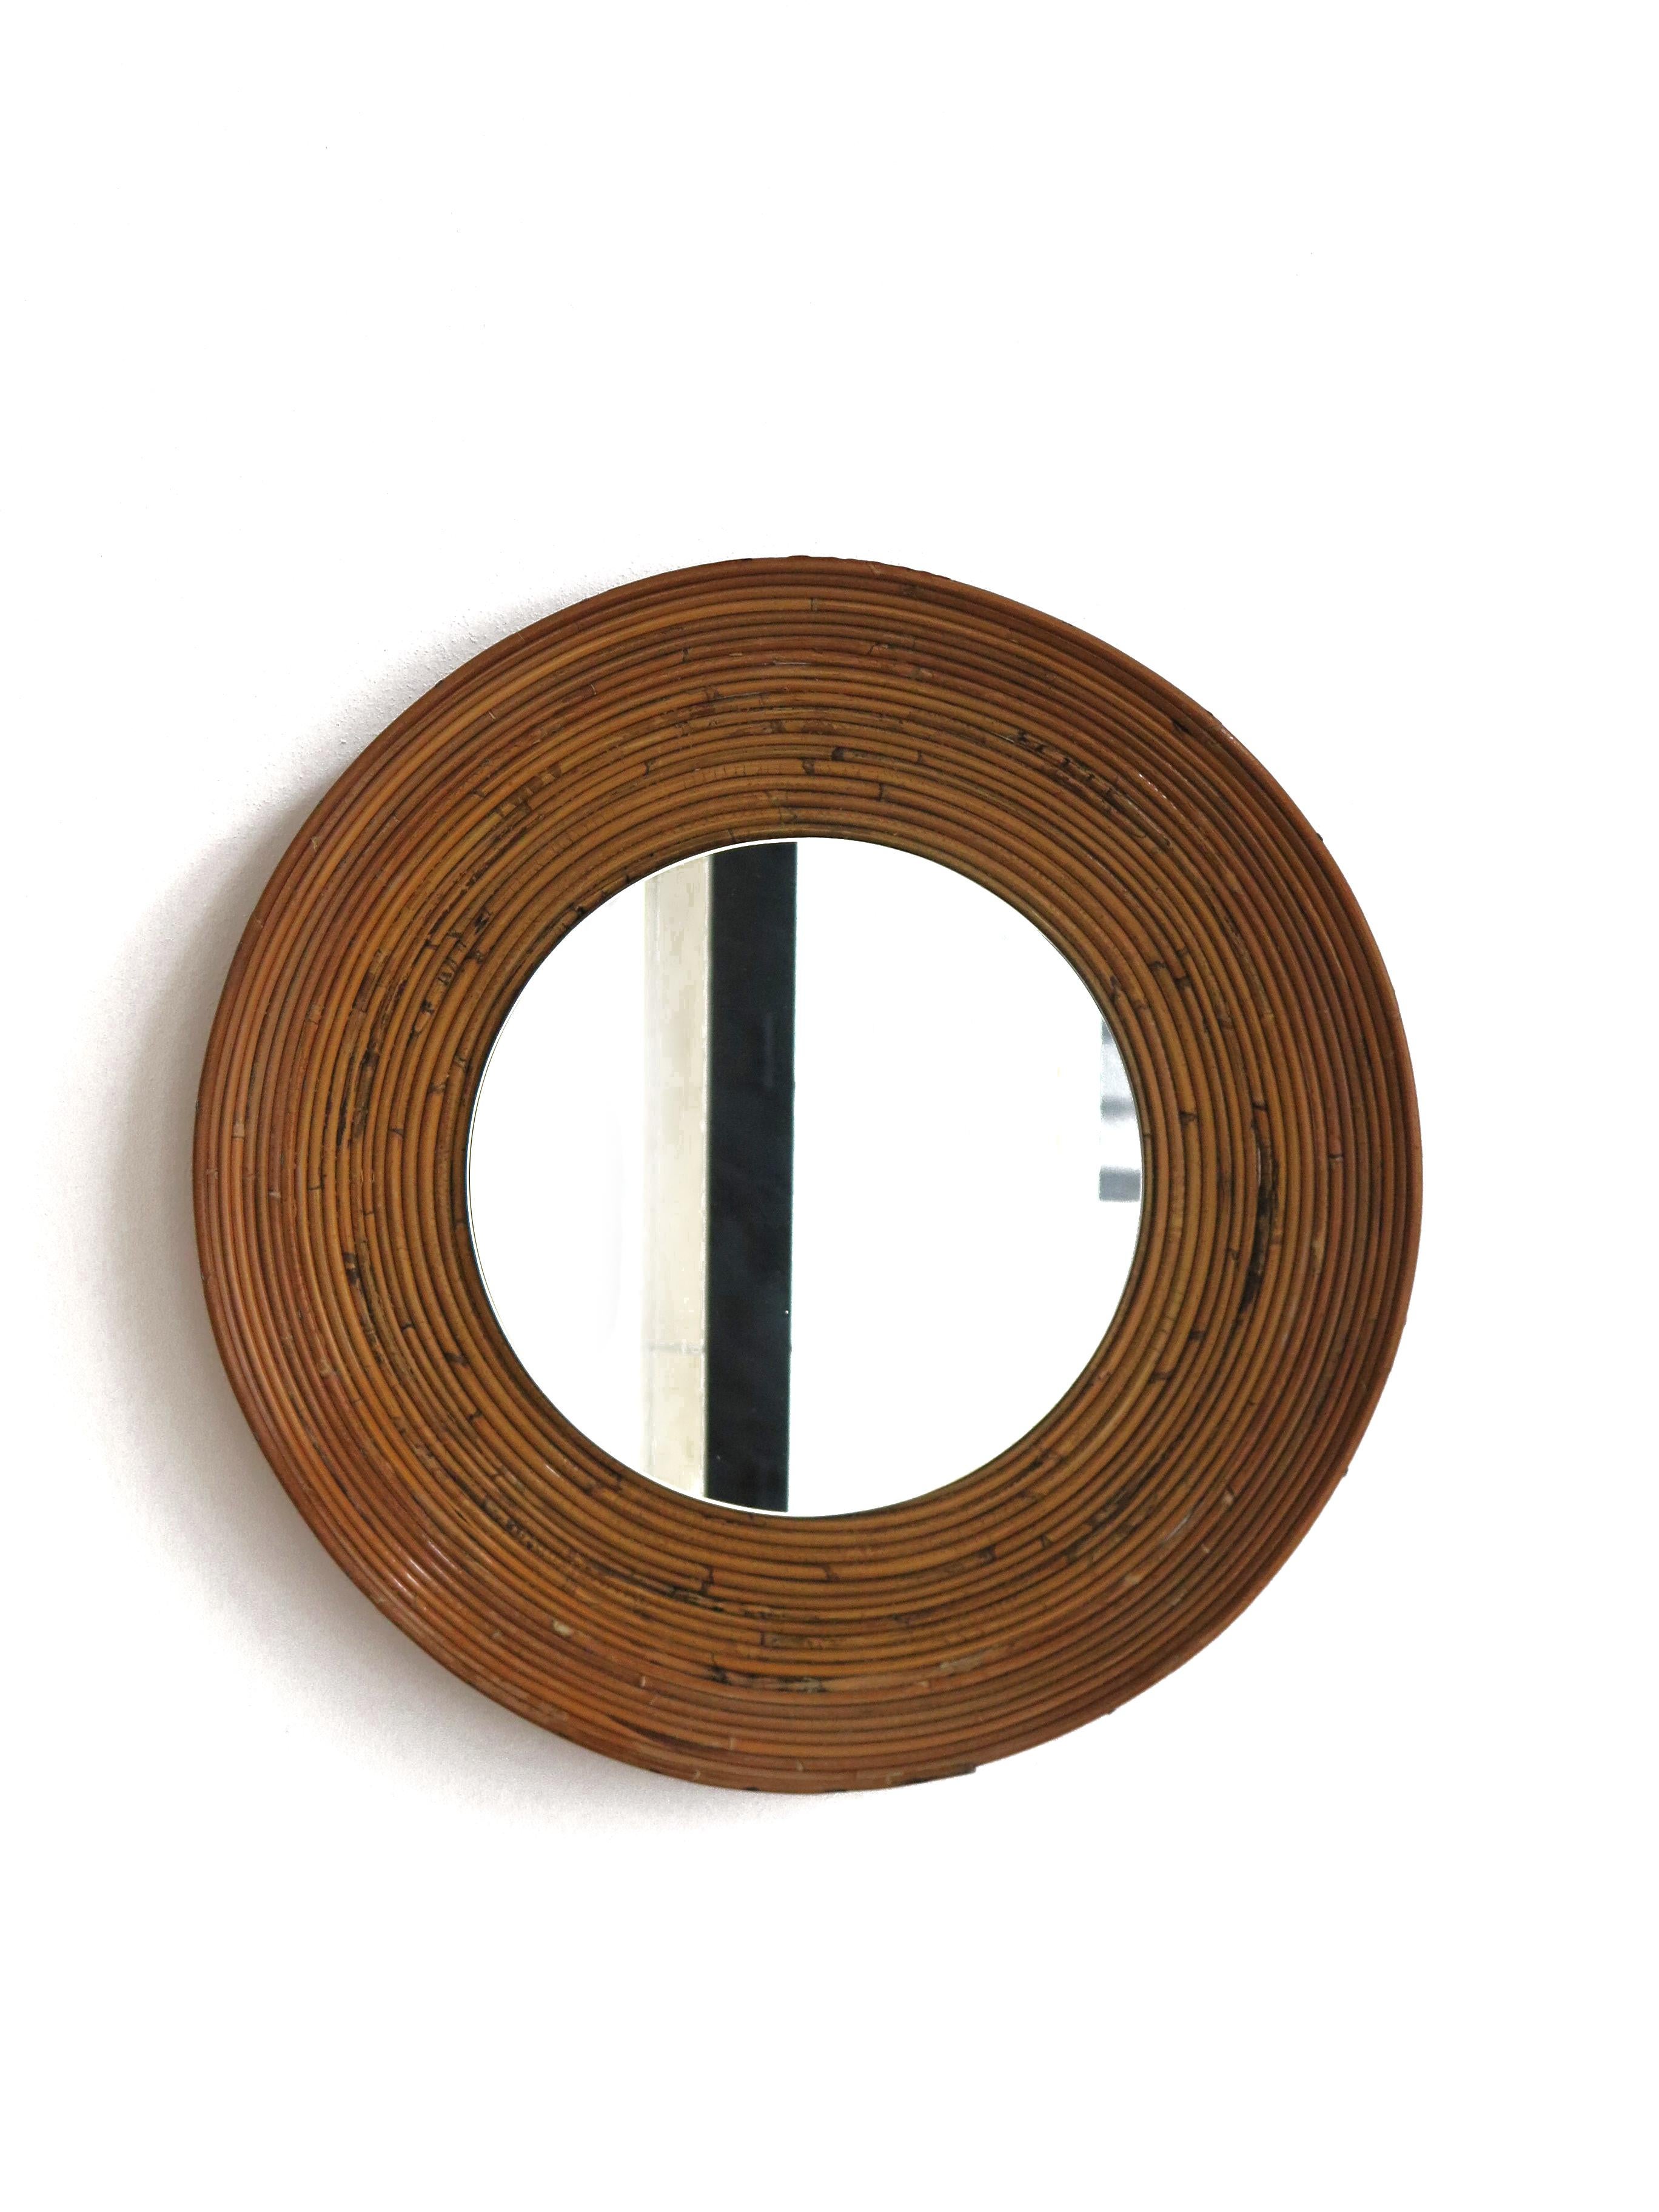 Mid-Century Moderrn design italian round wall mirror with rattan bamboo frame, Italy 1960s.

Please note that the lamp is original of the period and this shows normal signs of age and use.